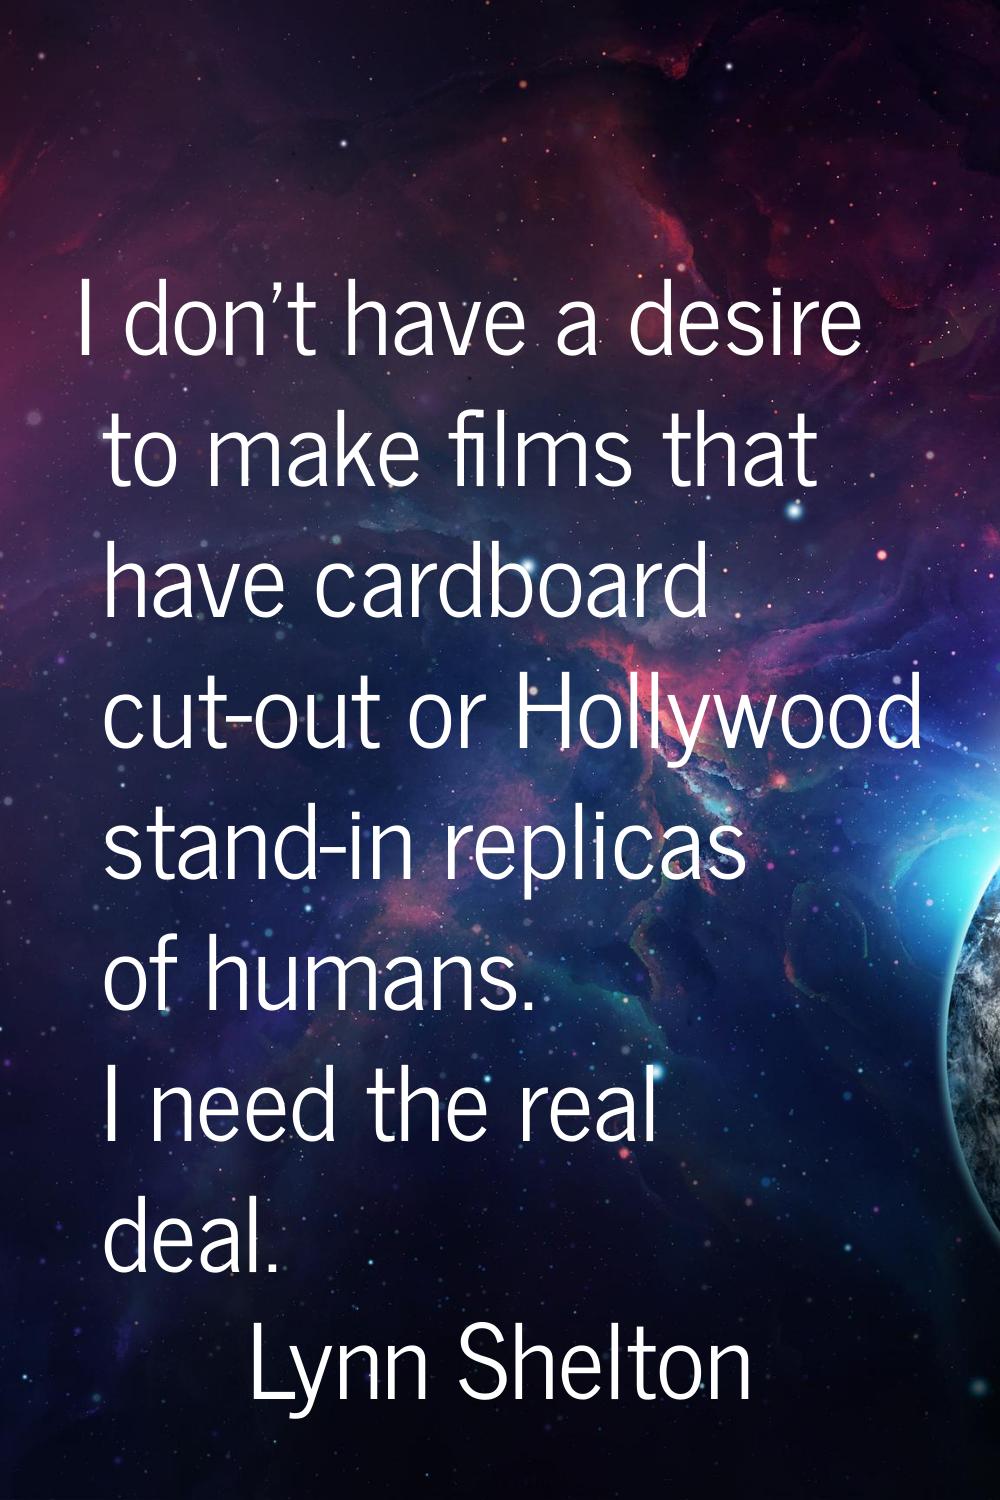 I don't have a desire to make films that have cardboard cut-out or Hollywood stand-in replicas of h